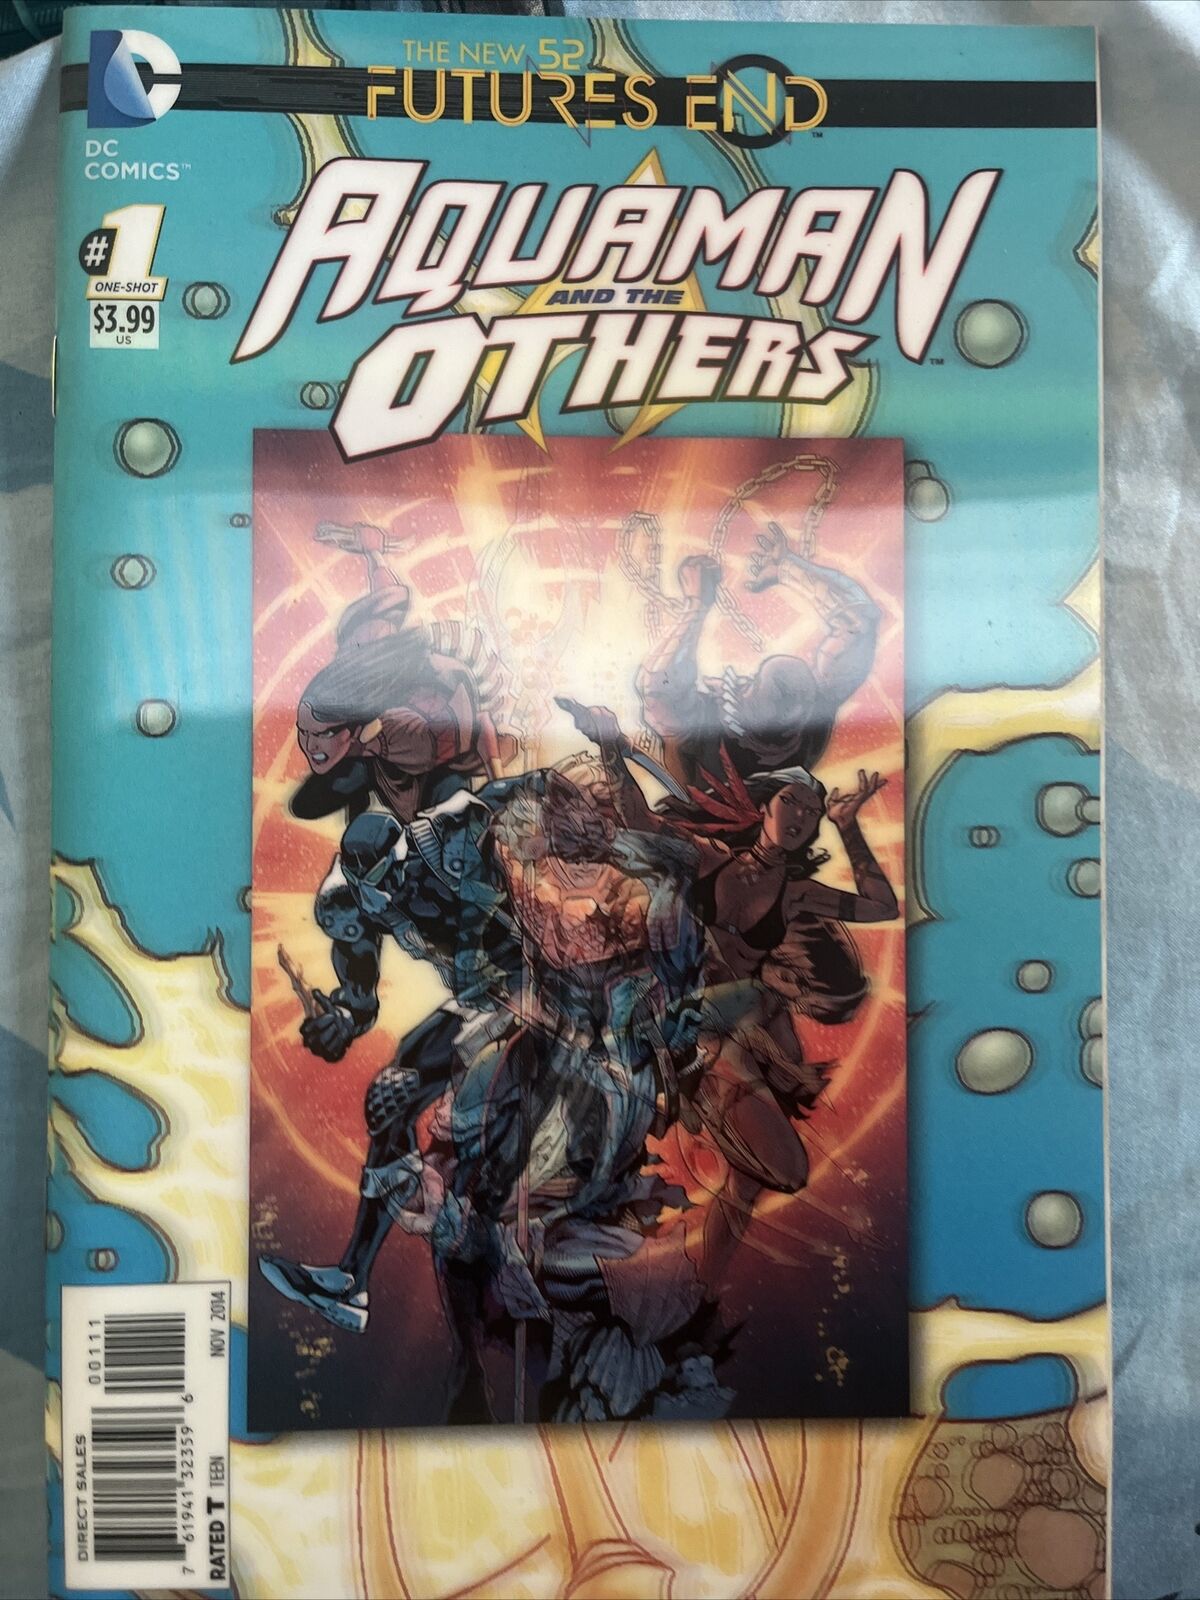 Aquaman and the Others #1 Futures End Lenticular 3D Cover (DC Comics 2014) NM